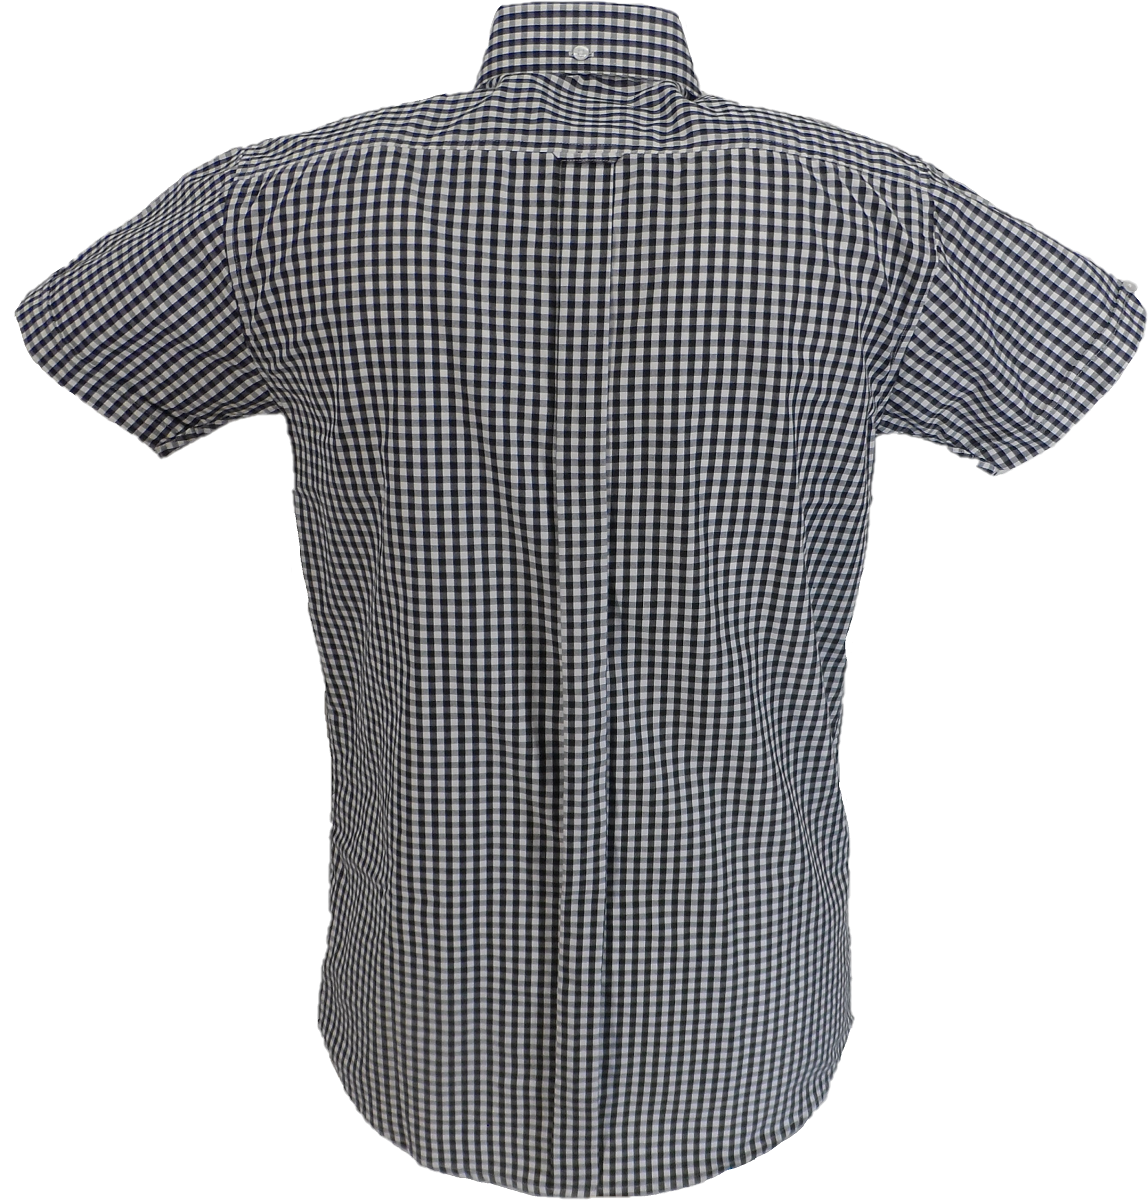 Relco Short Sleeved Black Gingham Check Button Down Shirts